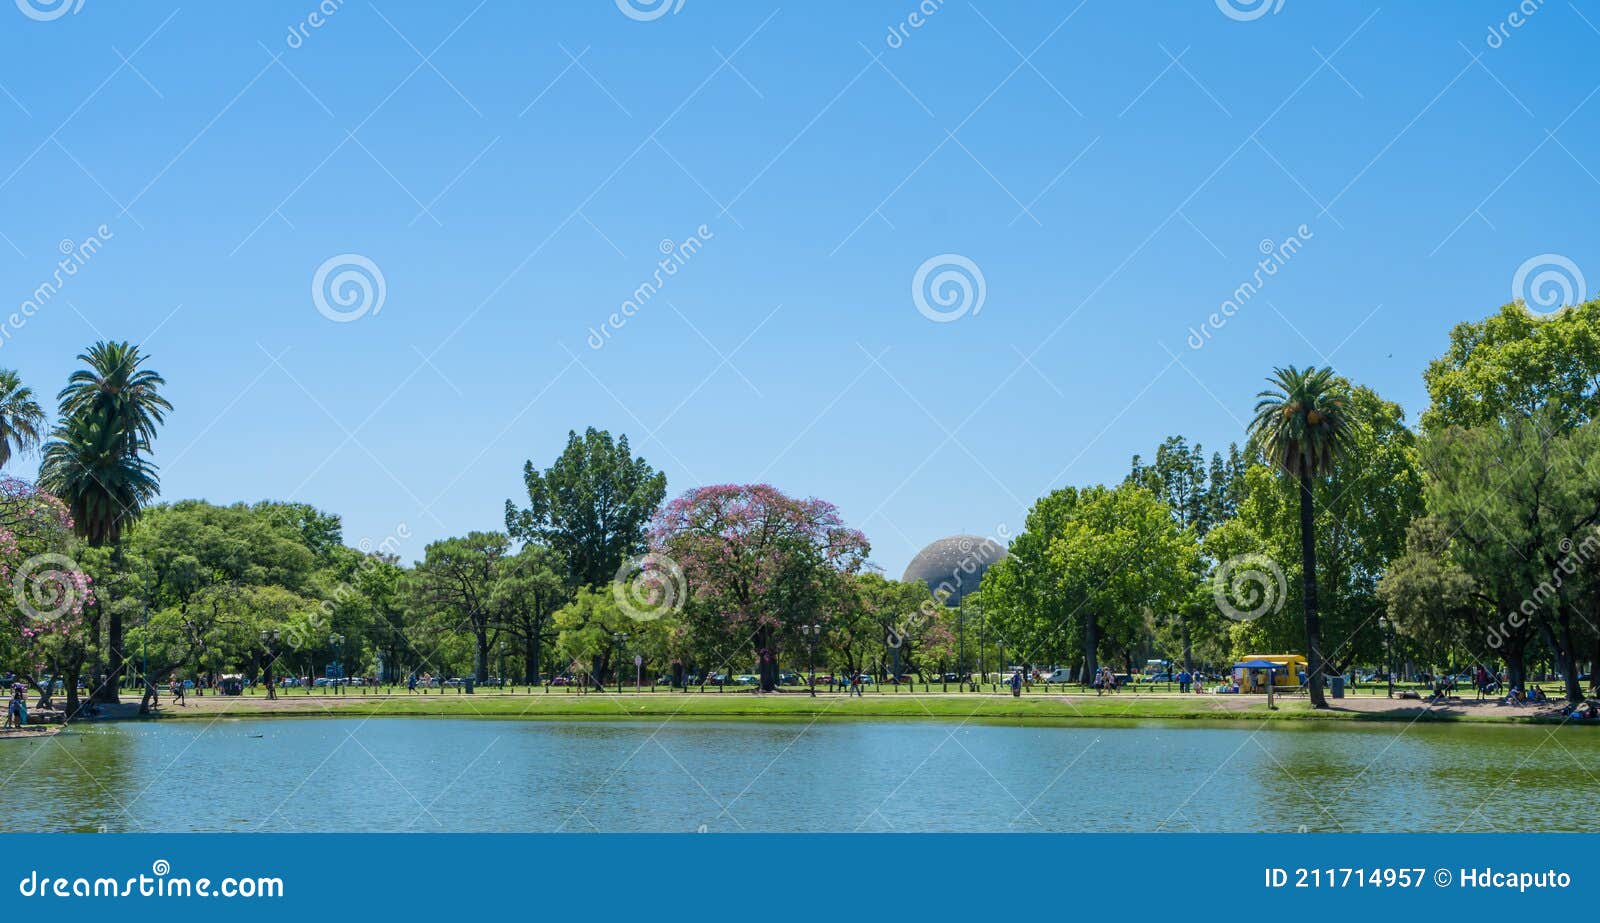 artificial lagoon that limits one of the parks in the forests of palermo, buenos aires. in the background you can see the